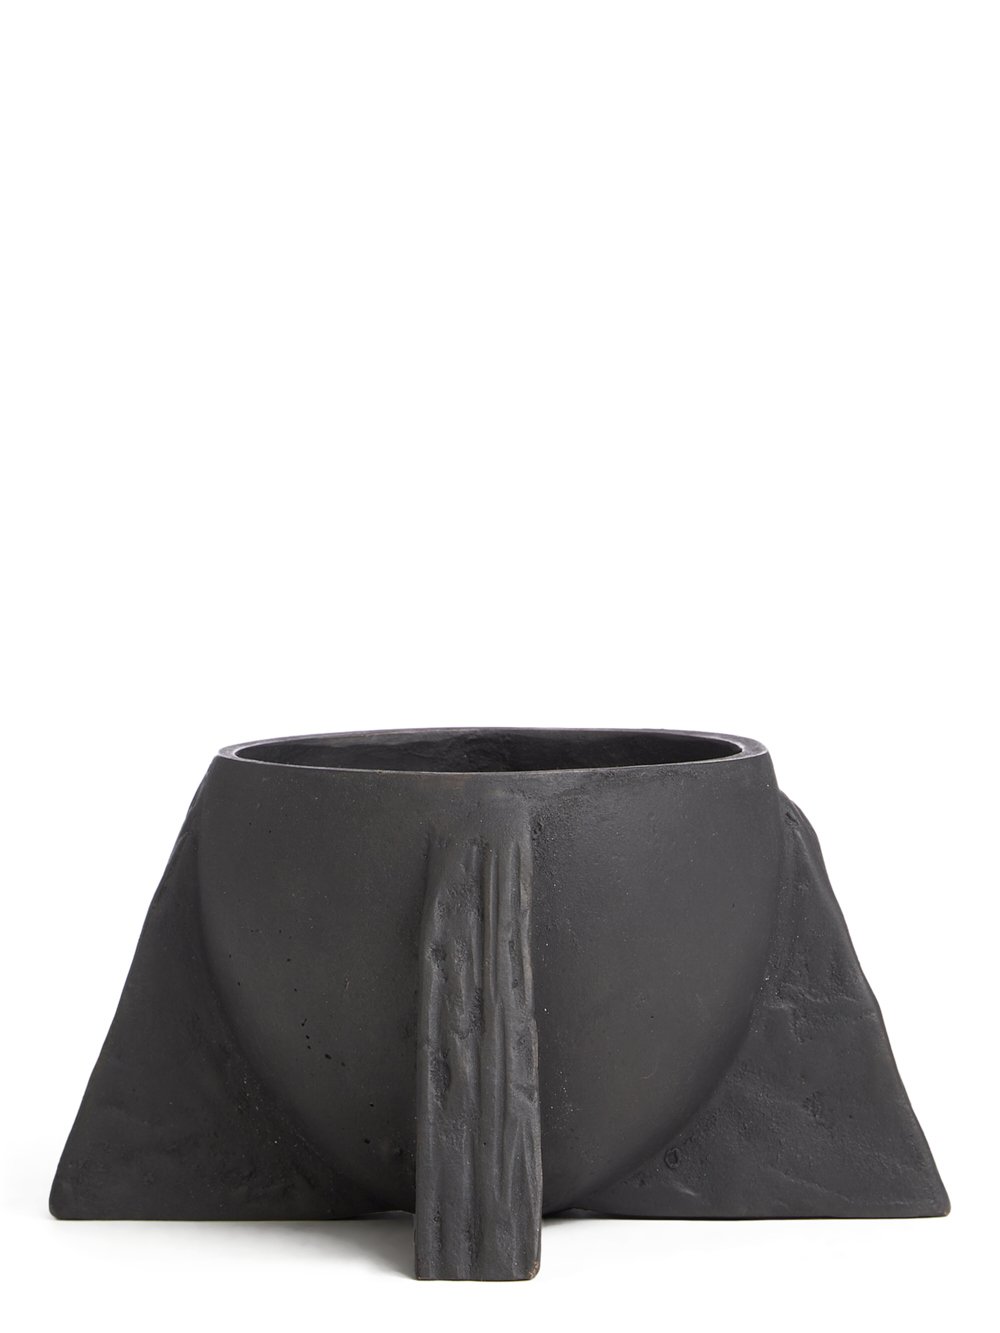 RICK OWENS COUPE IN BLACK BRONZE HAS AN HALF-OVAL SHAPE, FEATURES FOUR LEGS AND SLIGHTLY IRREGULAR SURFACE.